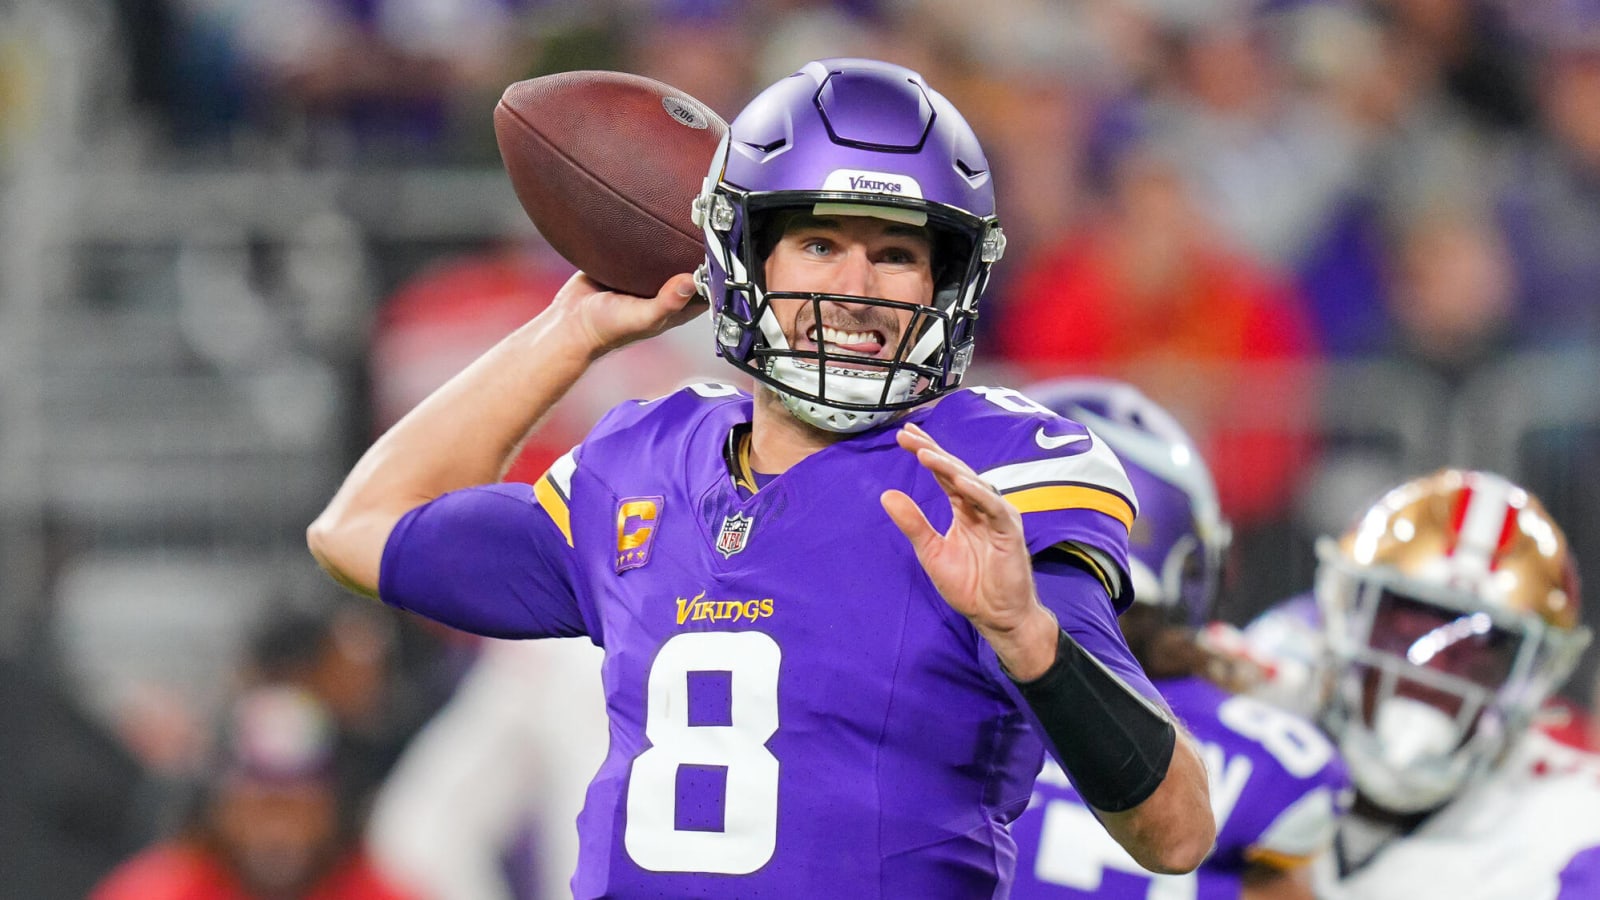 Report: Vikings want to re-sign Cousins but will consider options